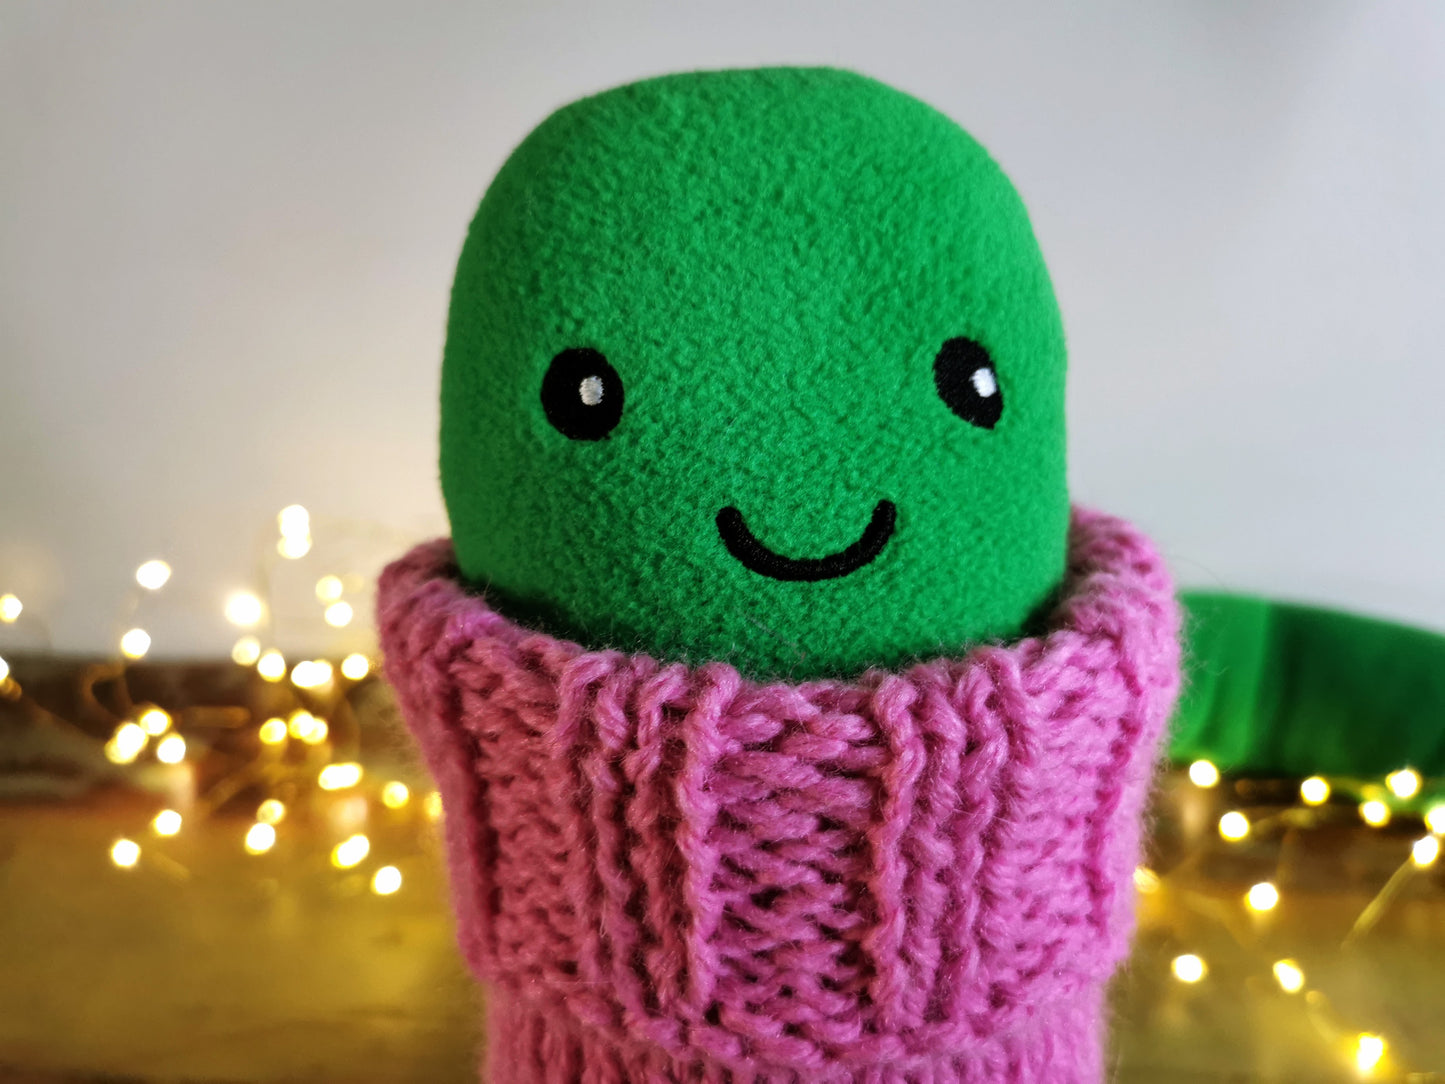 Giant Worm Plush dressed in knitted sweater, Plush Book Worm, 200cm, READY TO DELIVER!